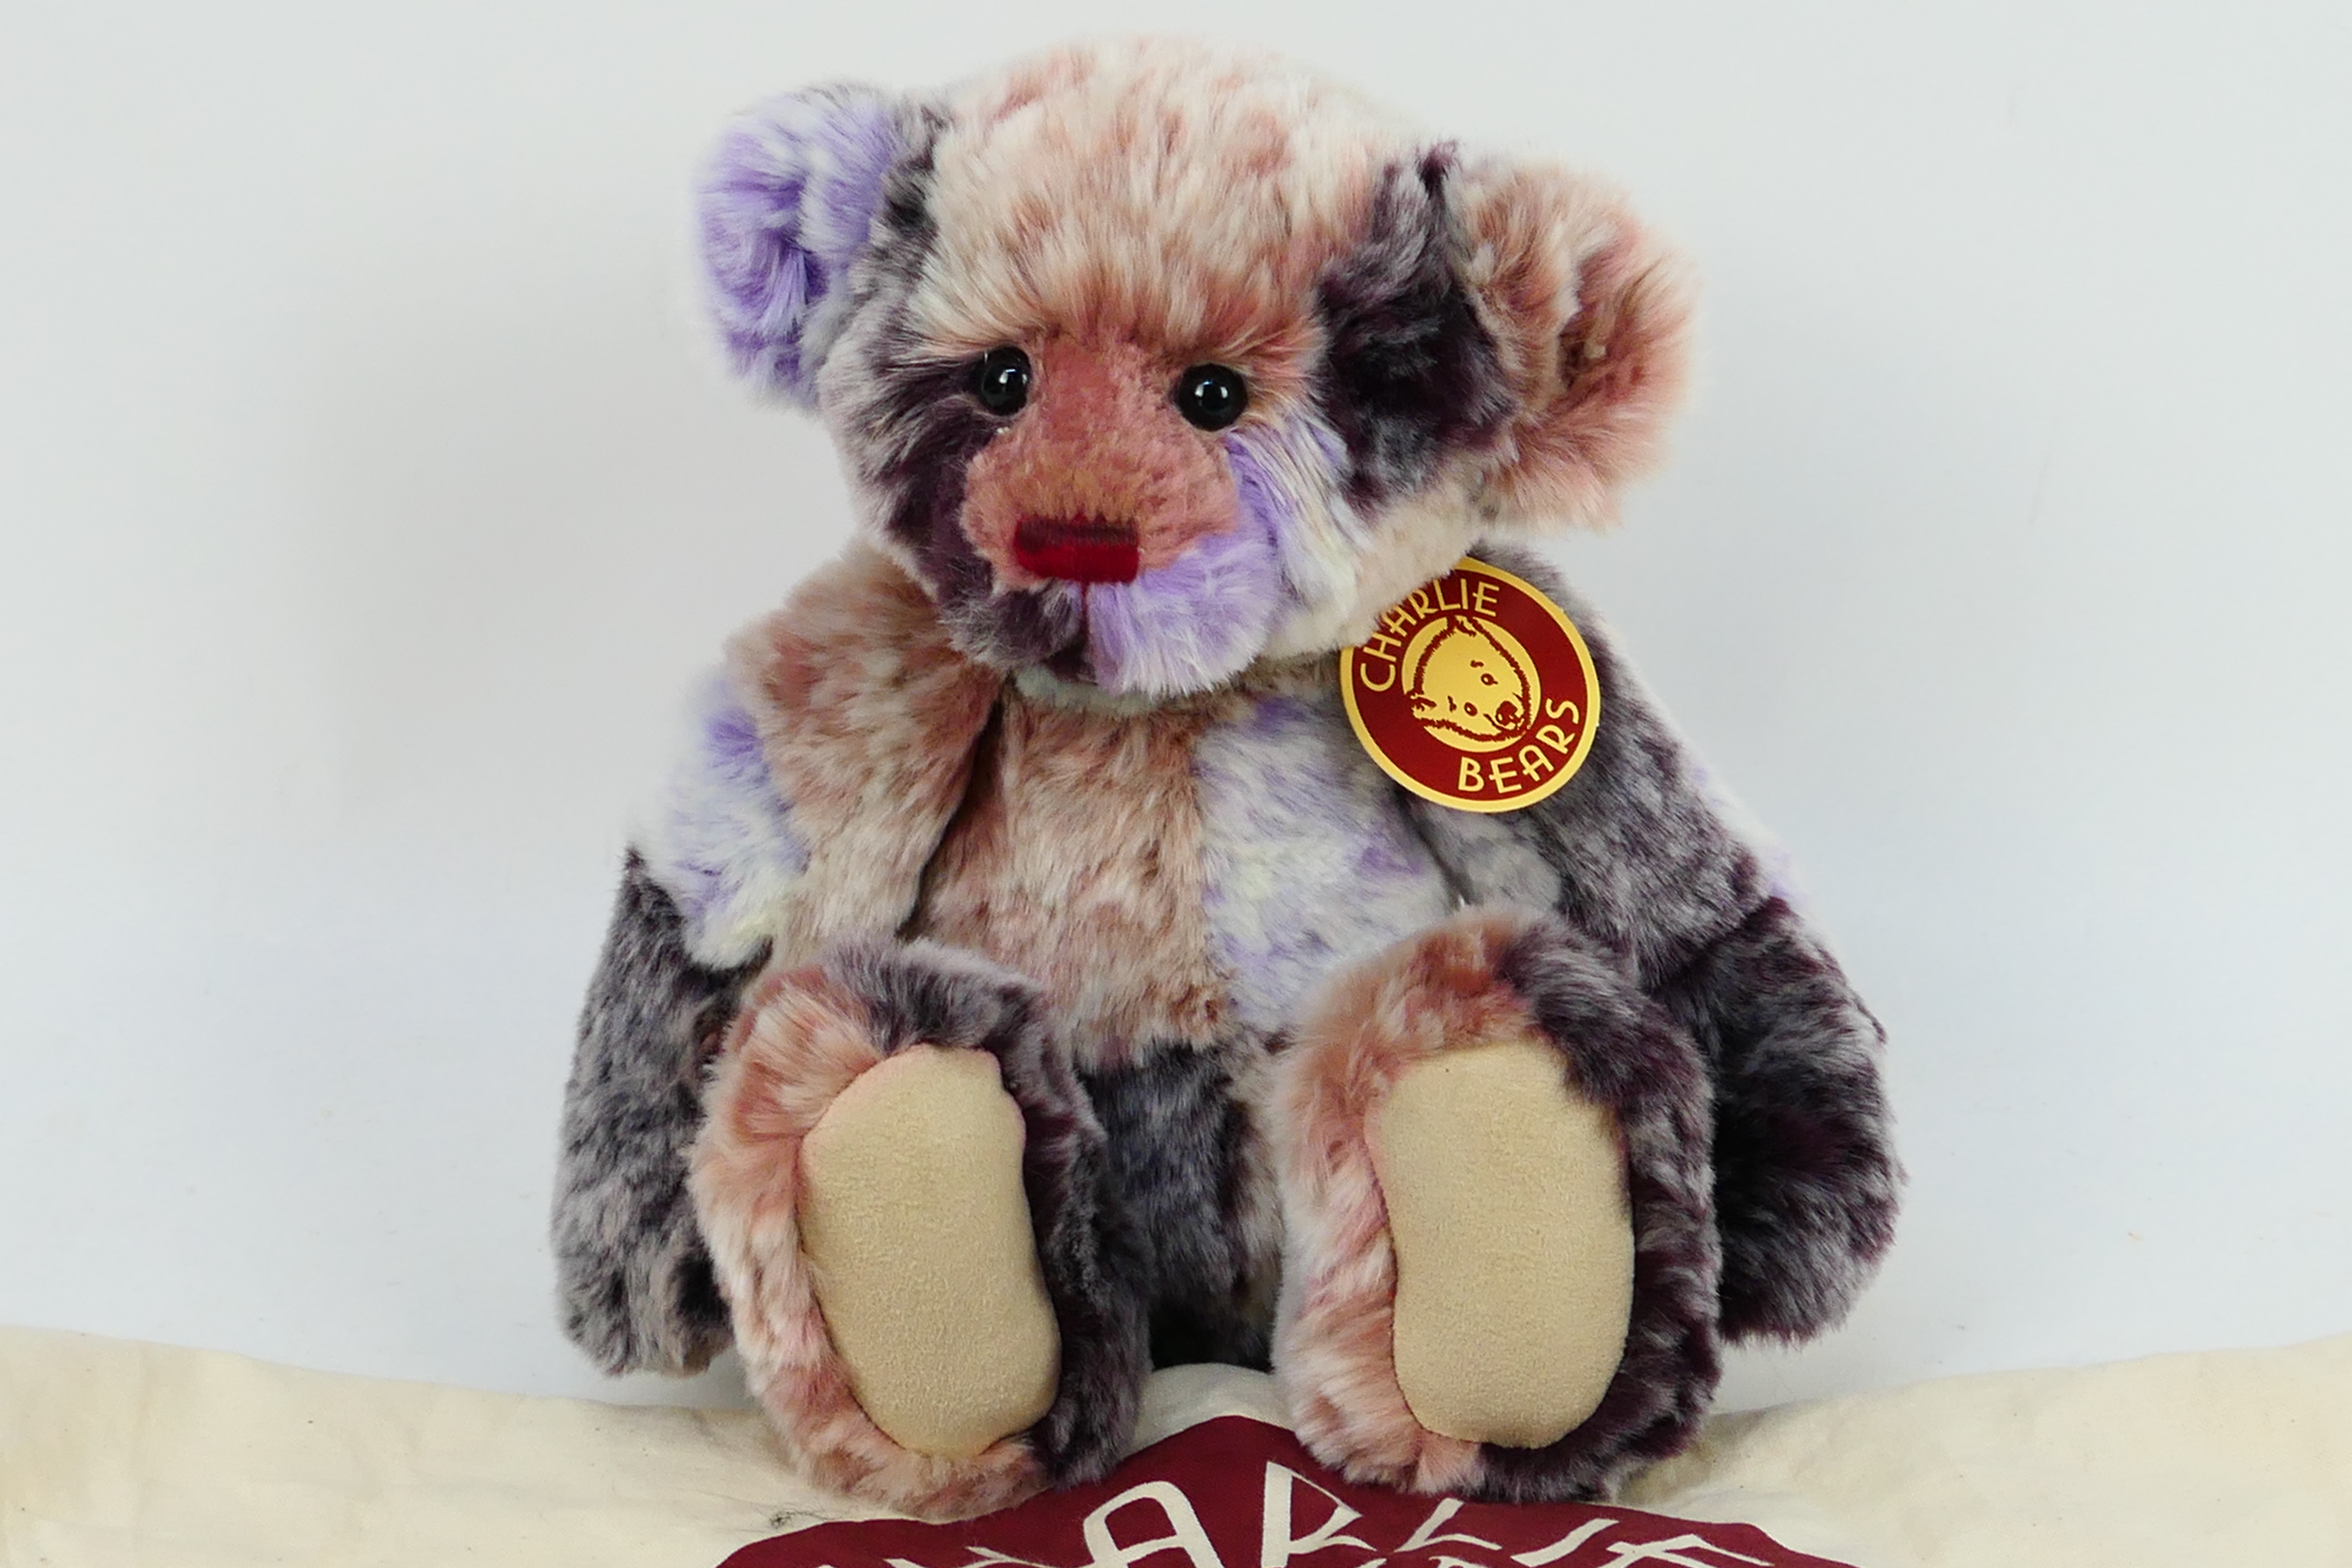 Charlie Bears - A Charlie Bears soft toy teddy bear #CB604748C 'Ragsy', designed by Isabelle Lee, - Image 2 of 5